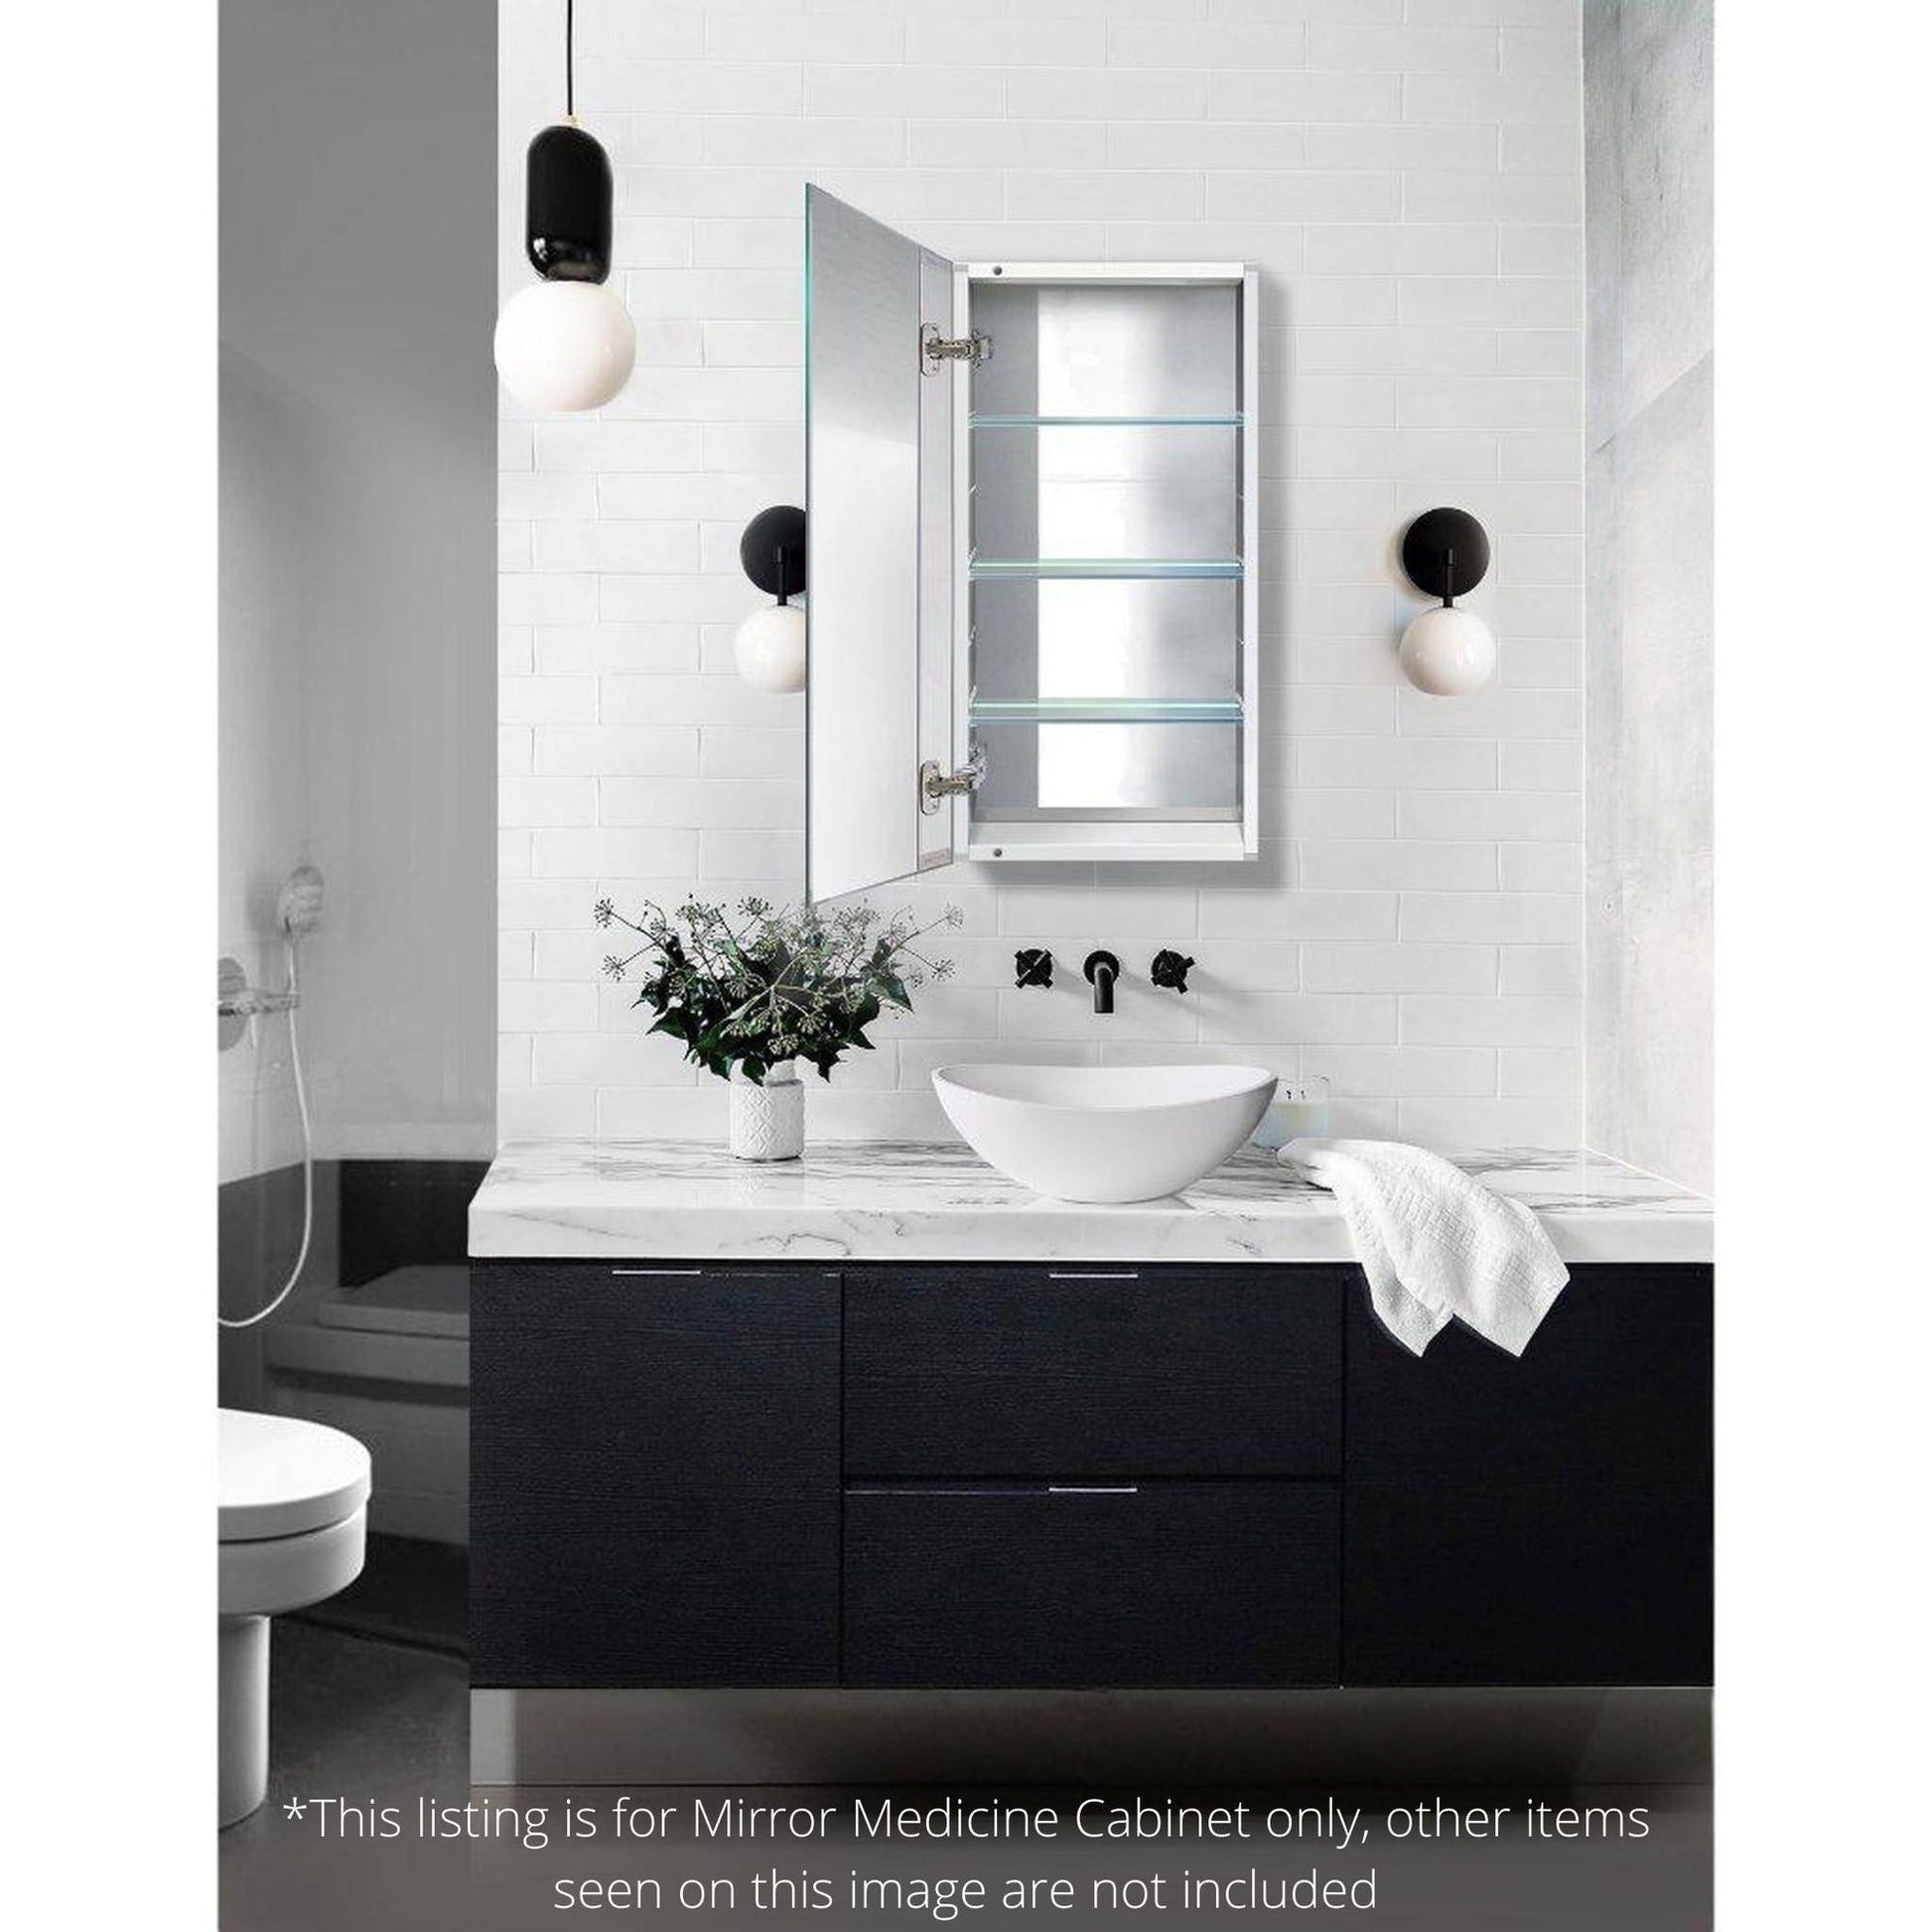 Krugg Reflections Plaza 16" x 30" Single Left Opening Rectangular Recessed/Surface-Mount Medicine Cabinet Mirror With Three Adjustable Shelves